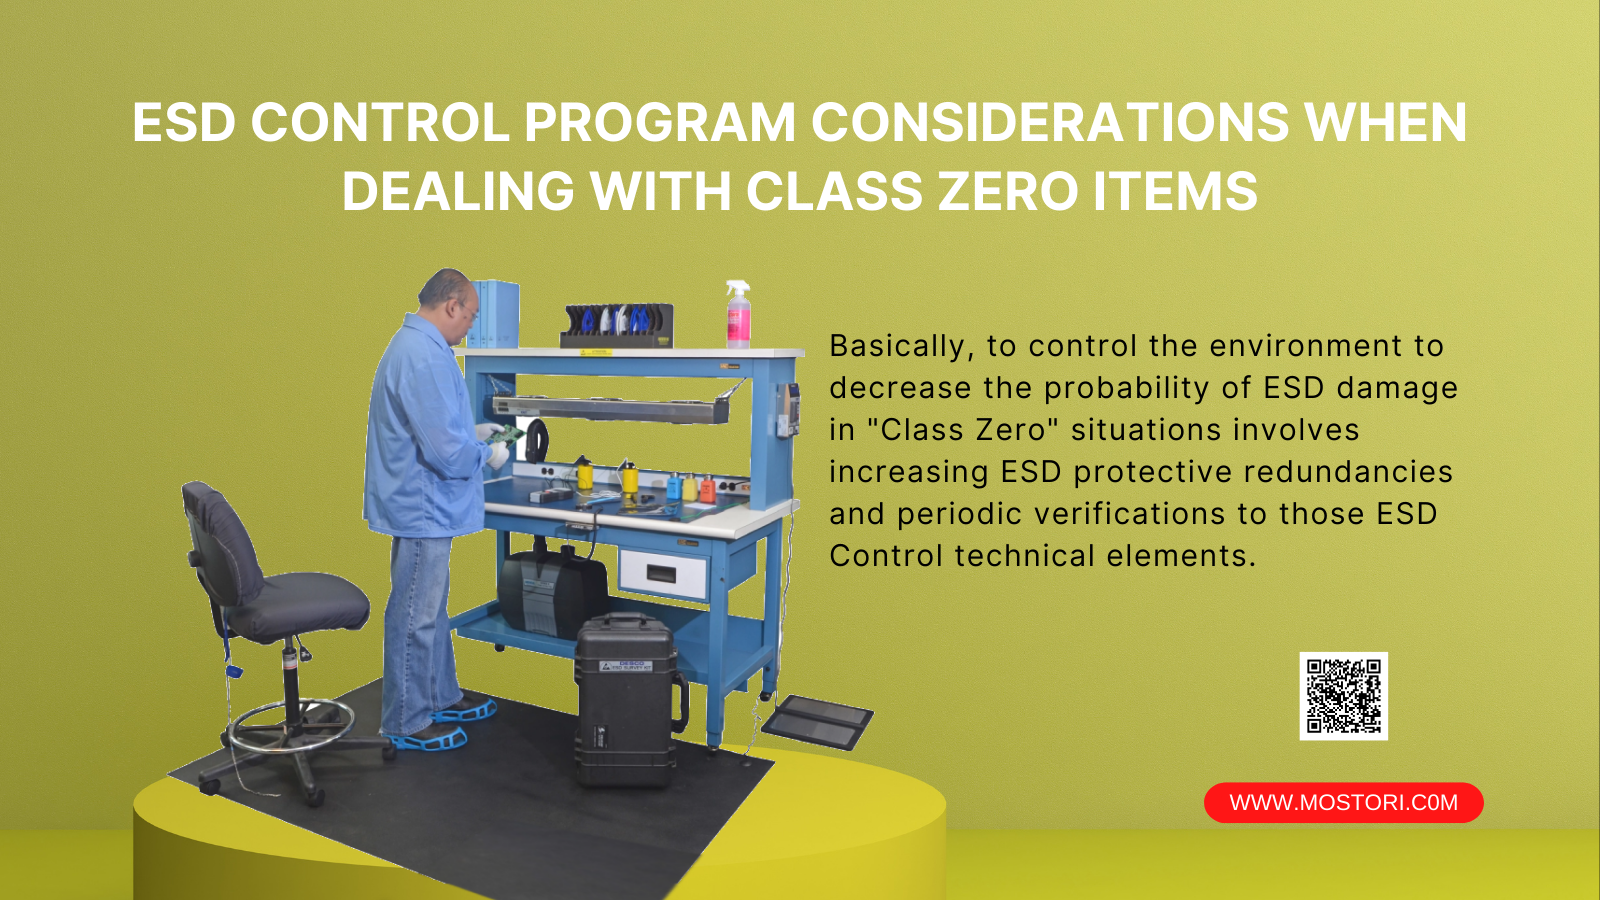 ESD CONTROL PROGRAM CONSIDERATIONS WHEN DEALING WITH CLASS ZERO ITEMS